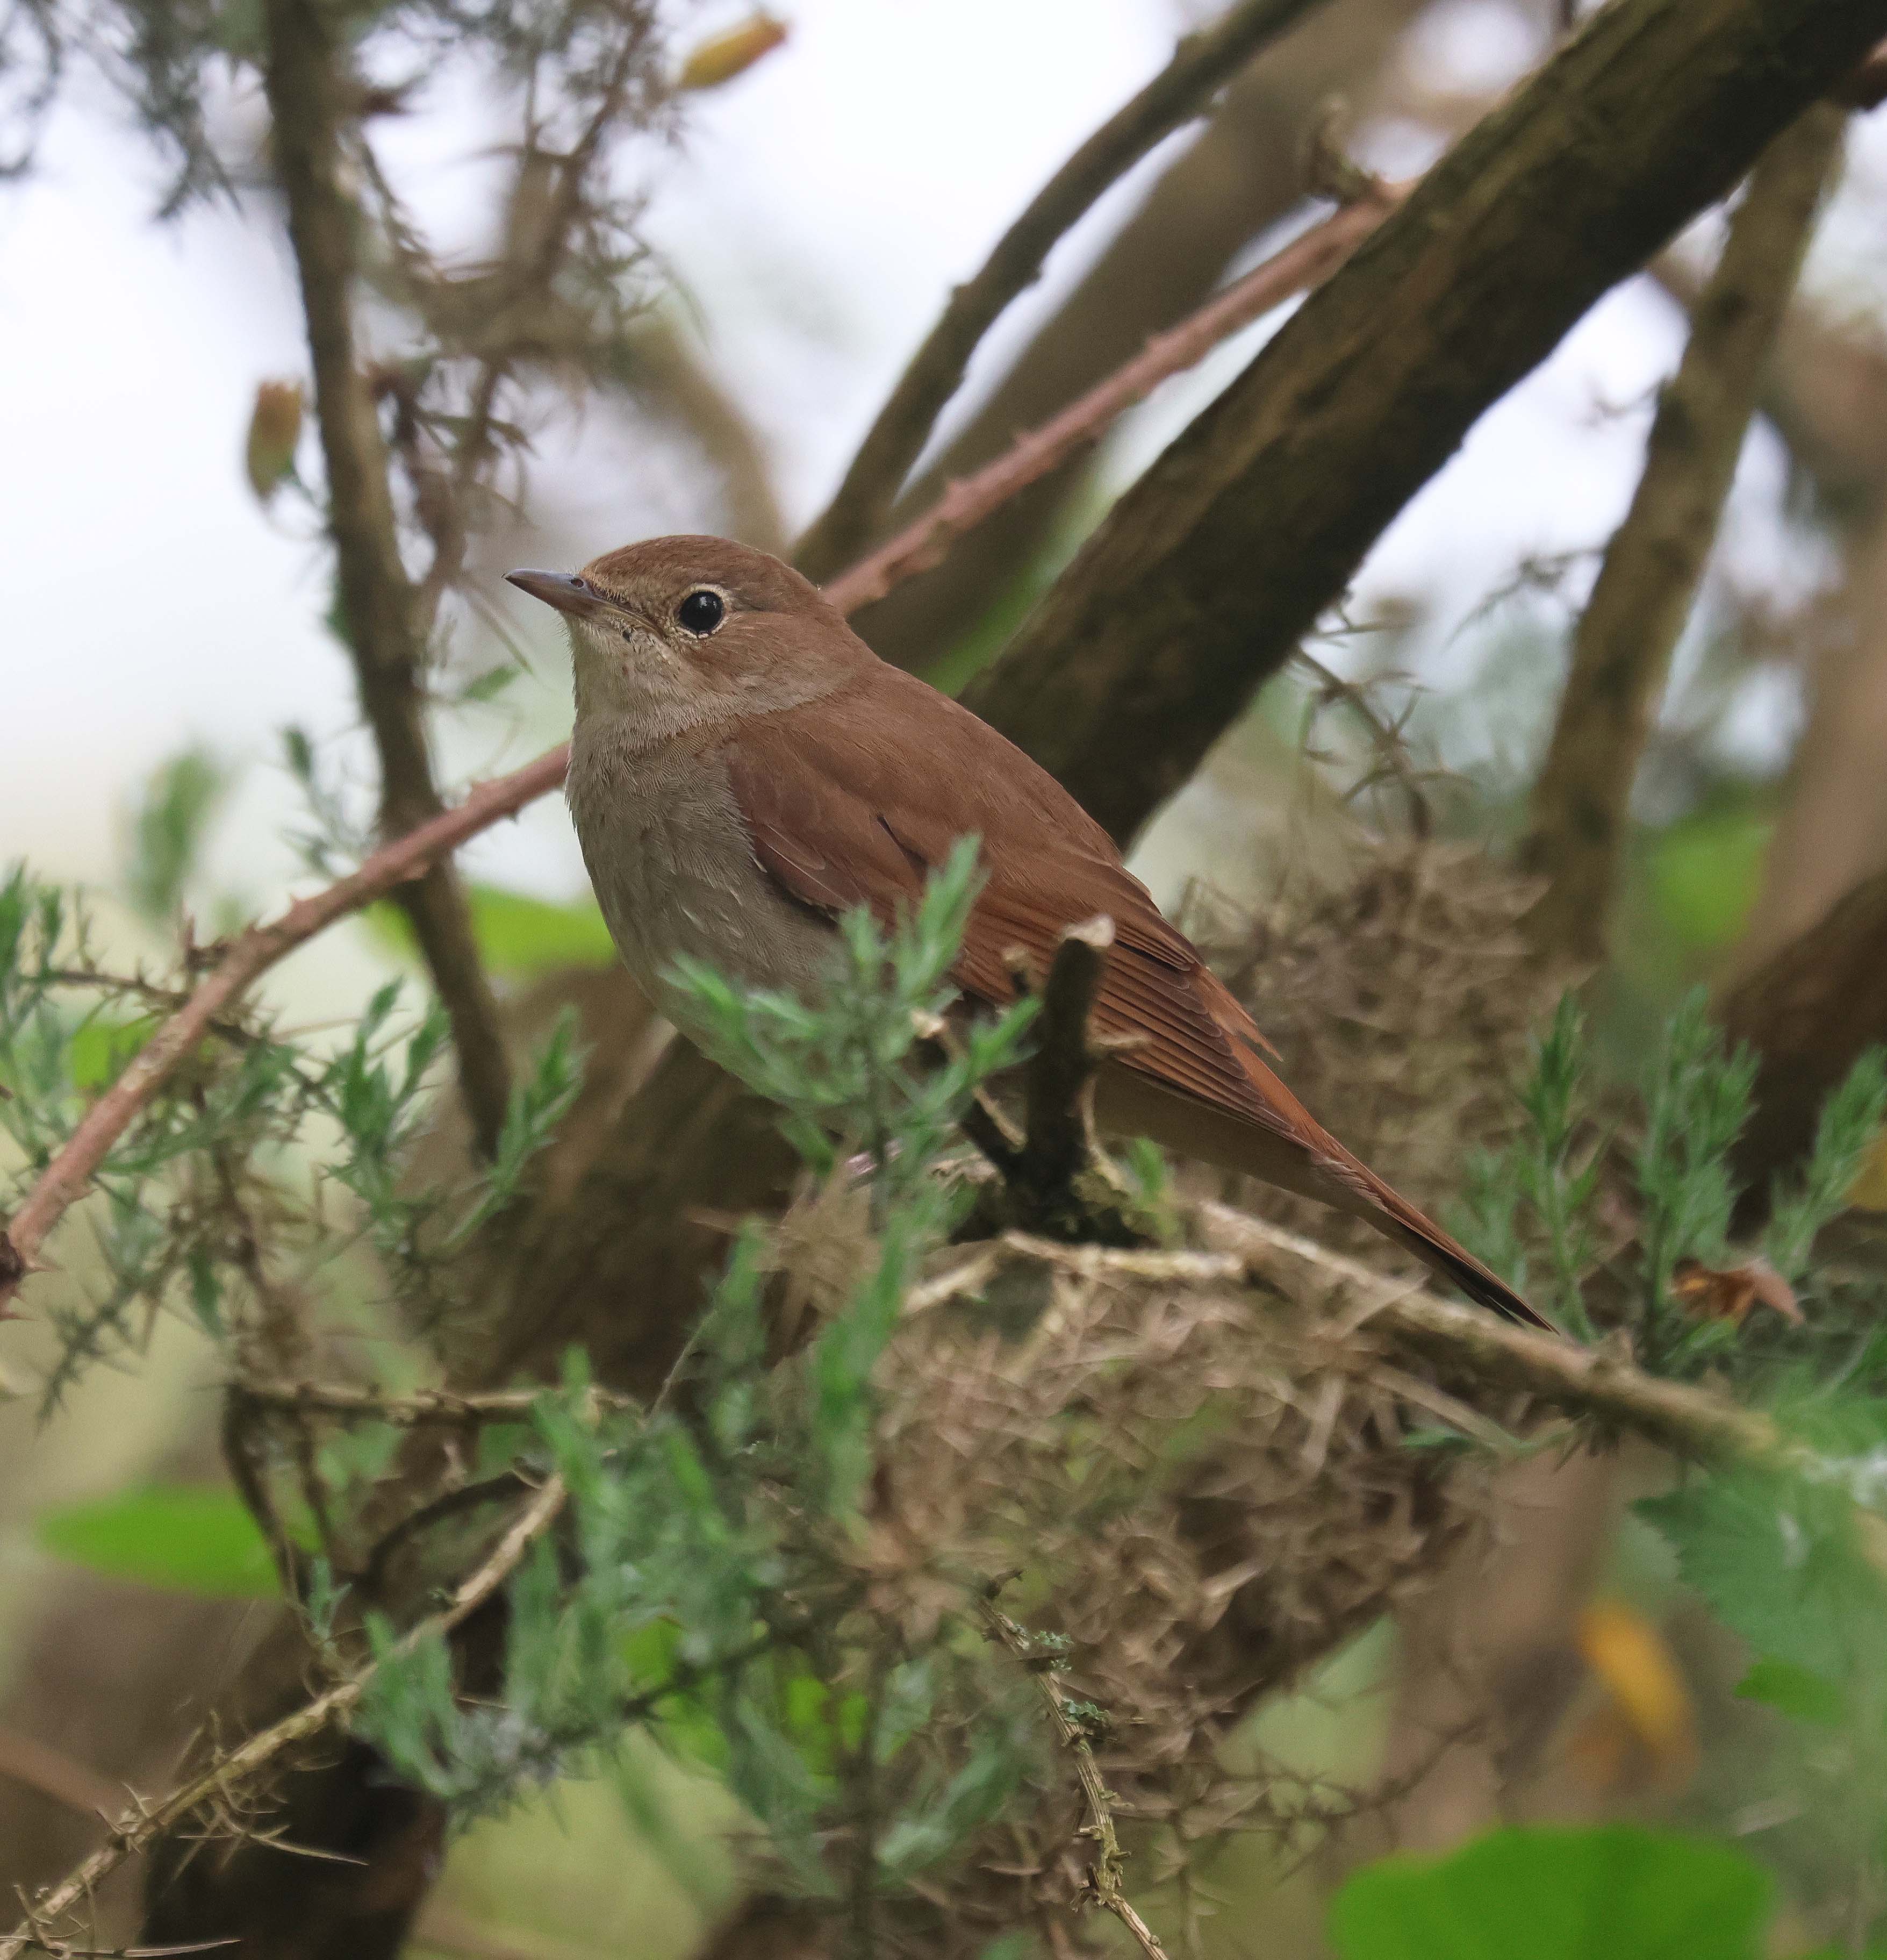 Nightingale Call British Bird Sounds - song and lyrics by Dr